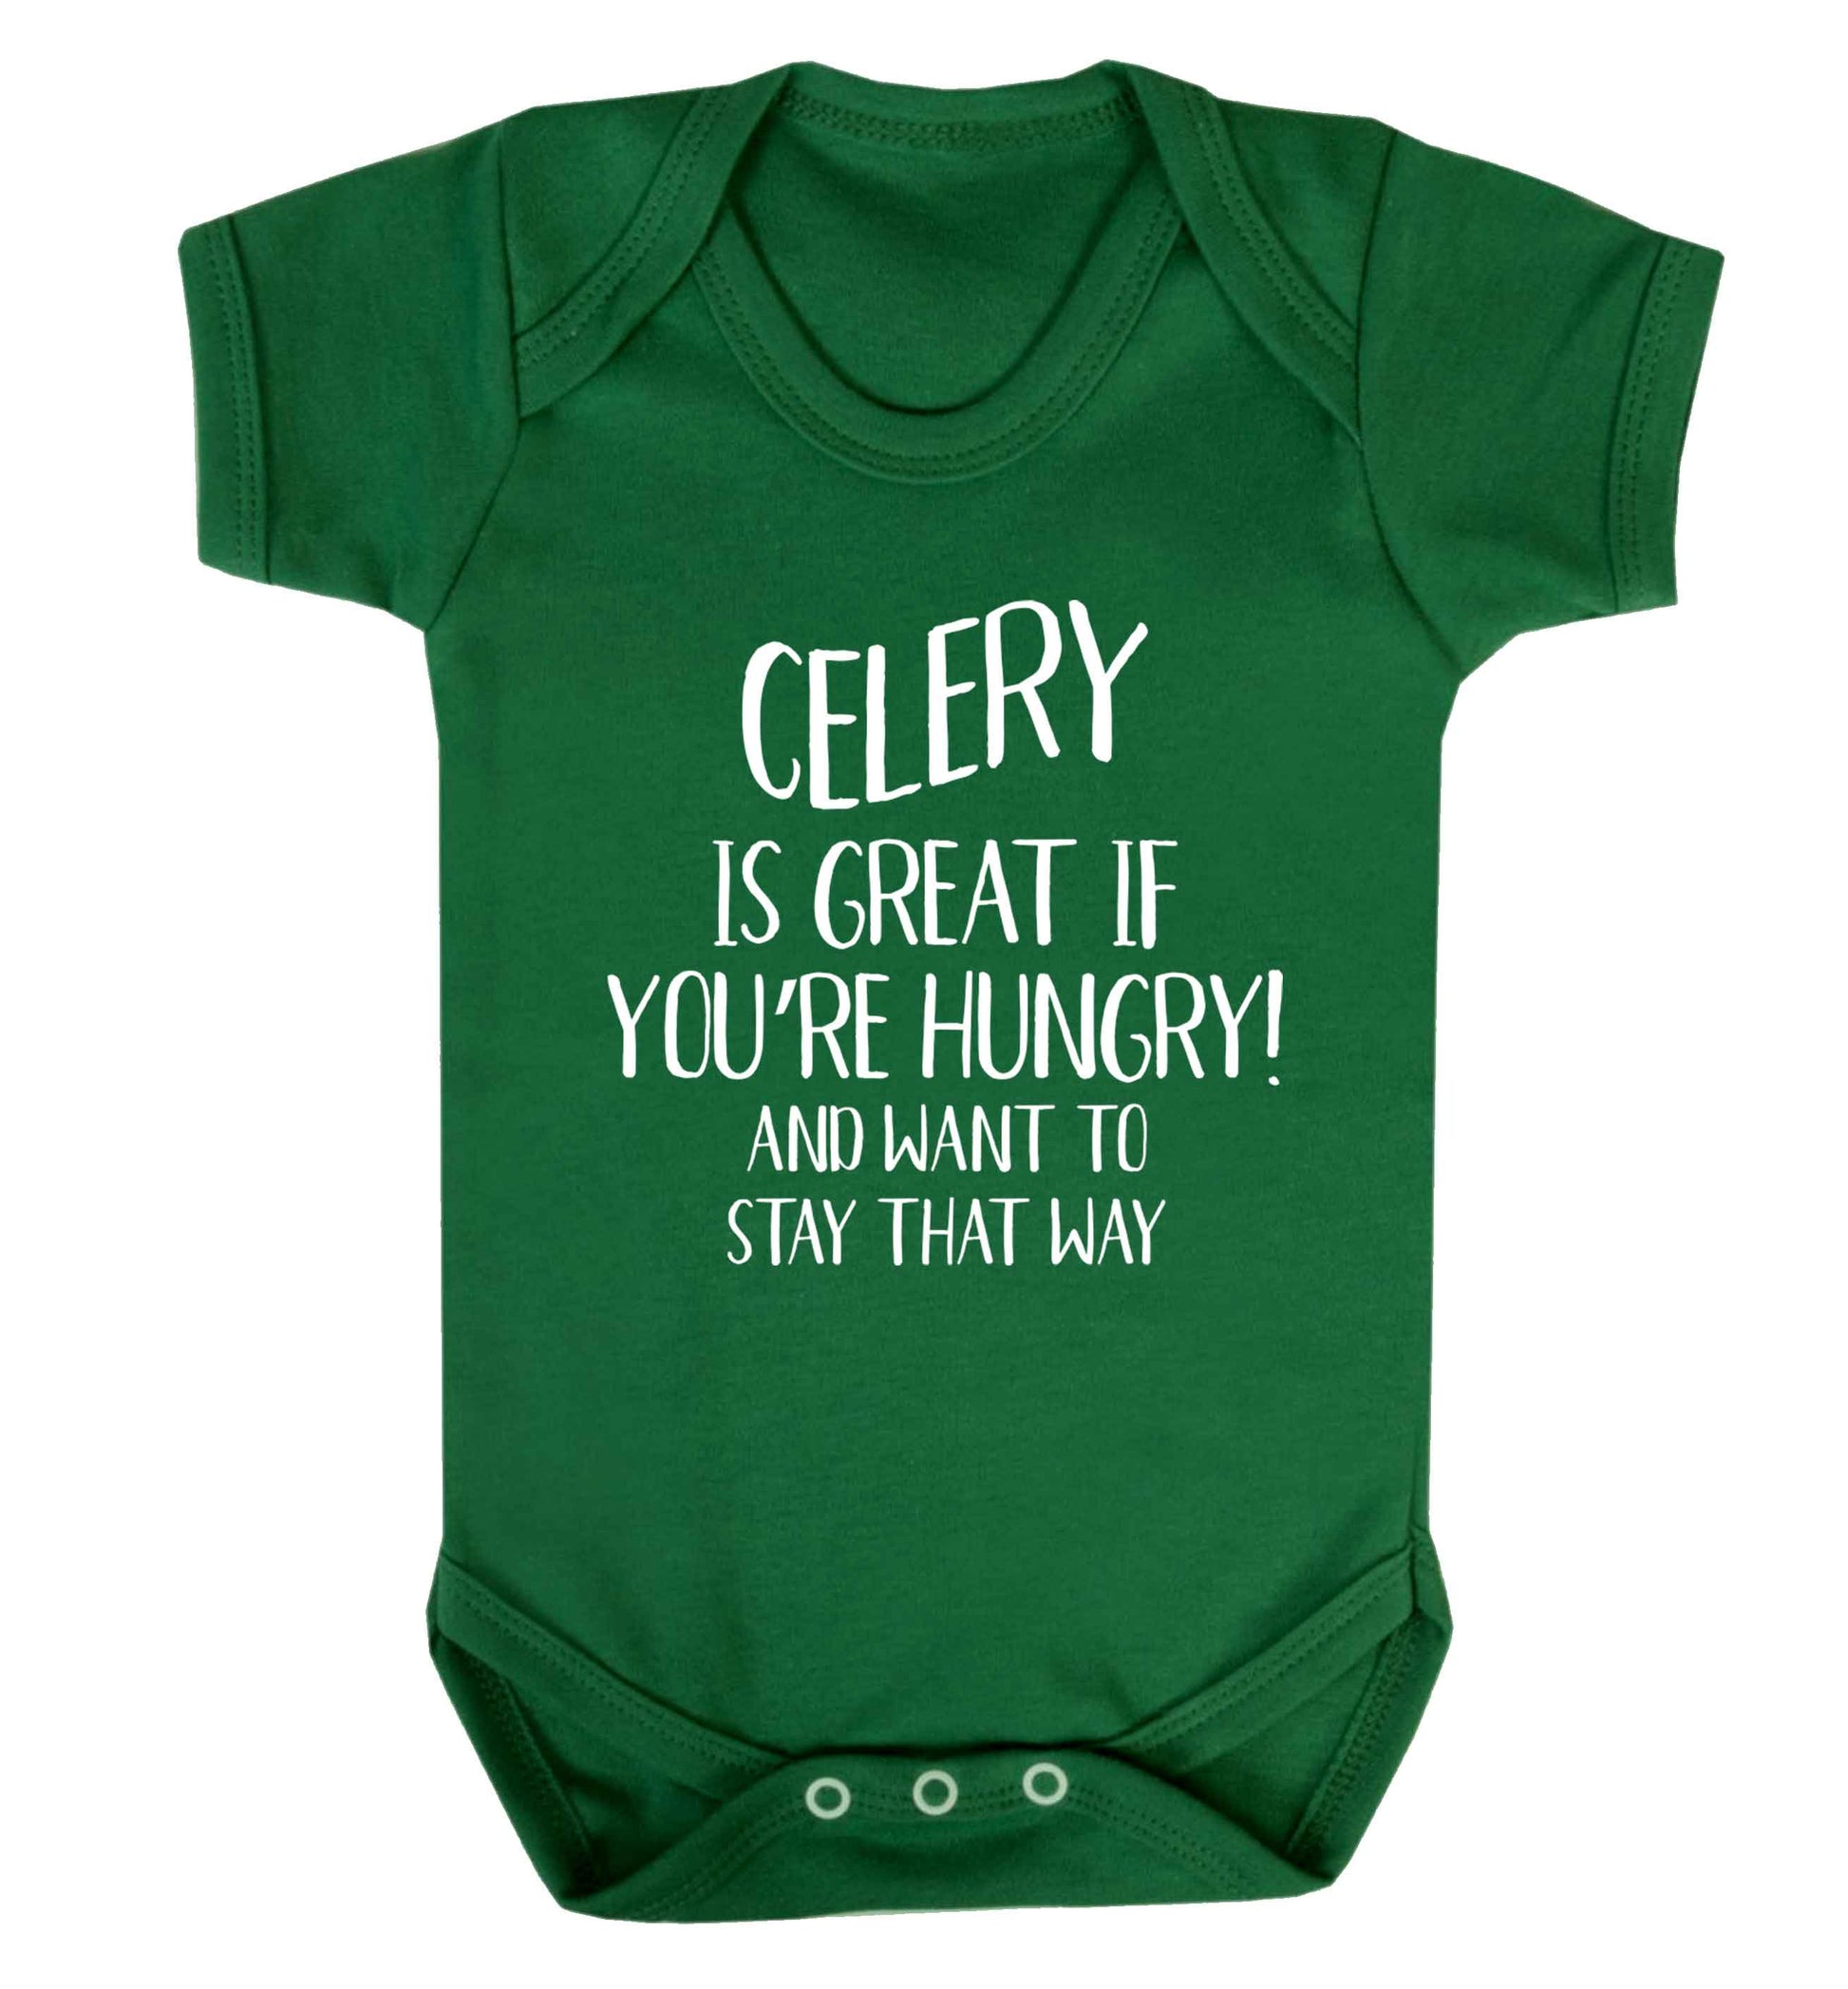 Cellery is great when you're hungry and want to stay that way Baby Vest green 18-24 months